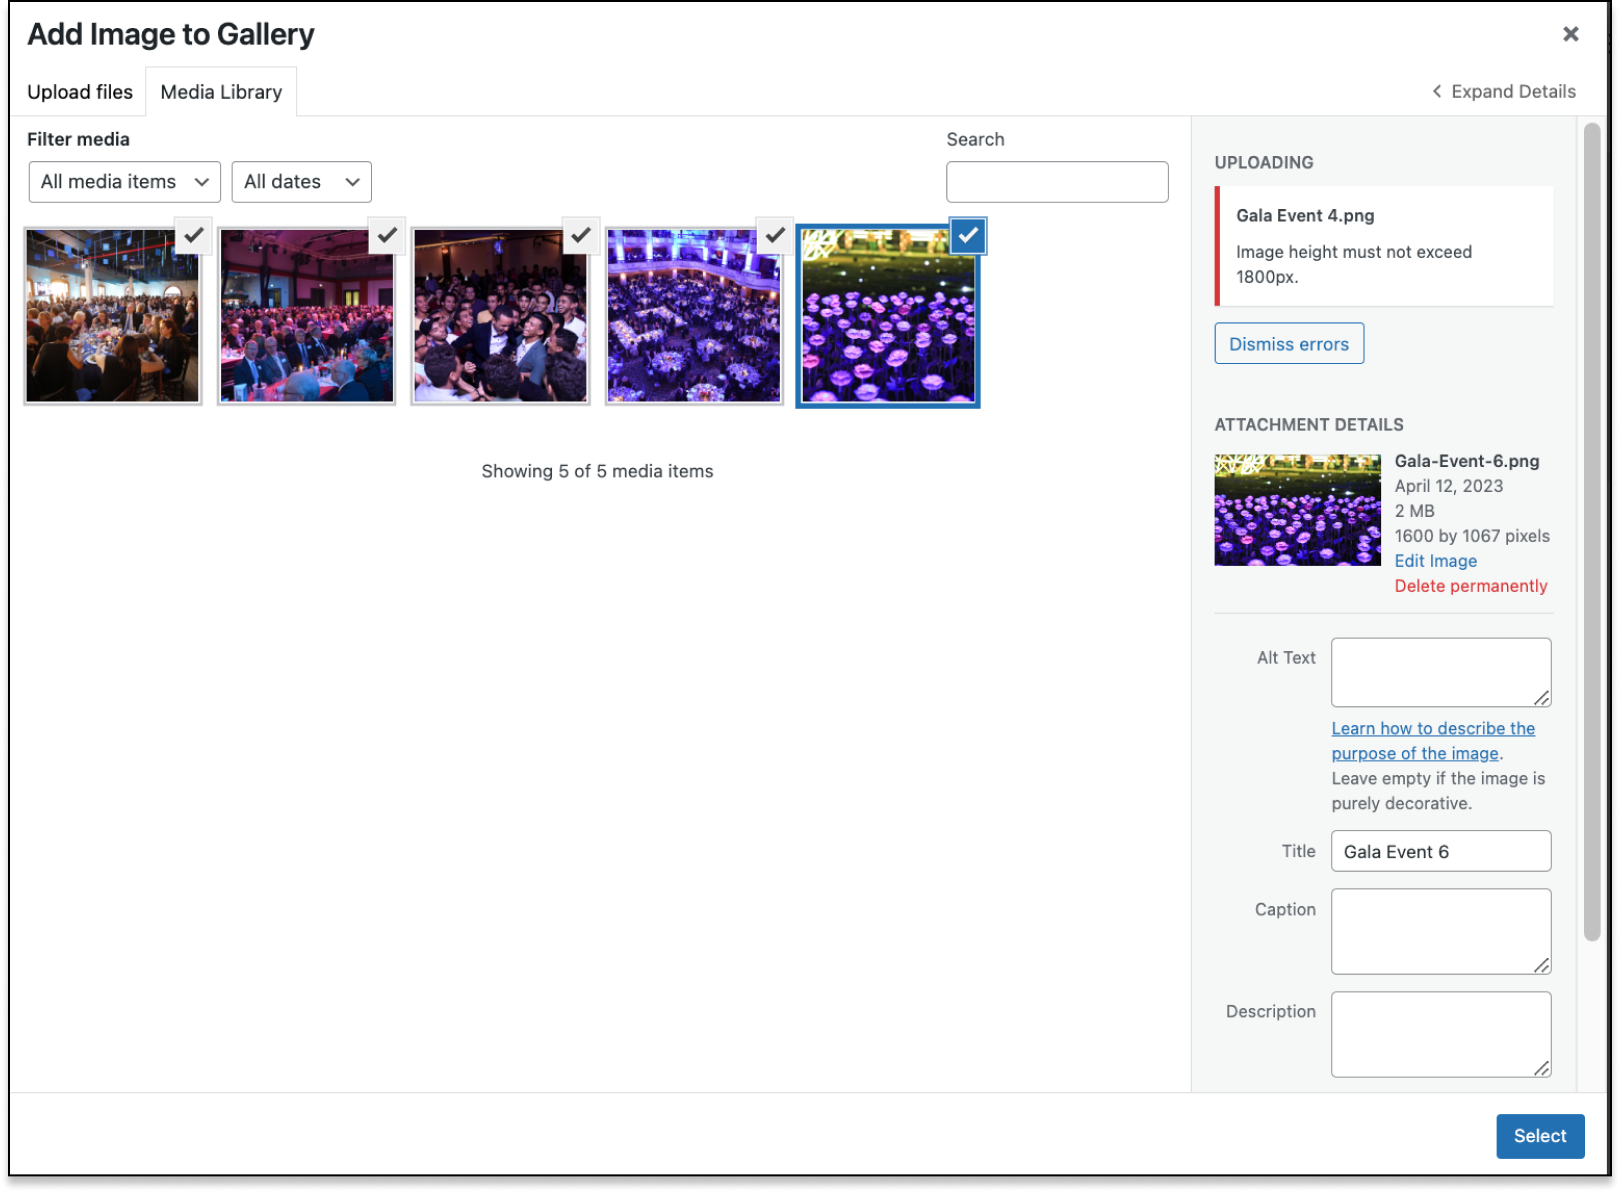 Setting validation rules ensures images uploaded to the Gallery field meet the right specifications. This screenshot shows a Gallery upload where one of the images has failed to upload because it did not meet the size specifications. 